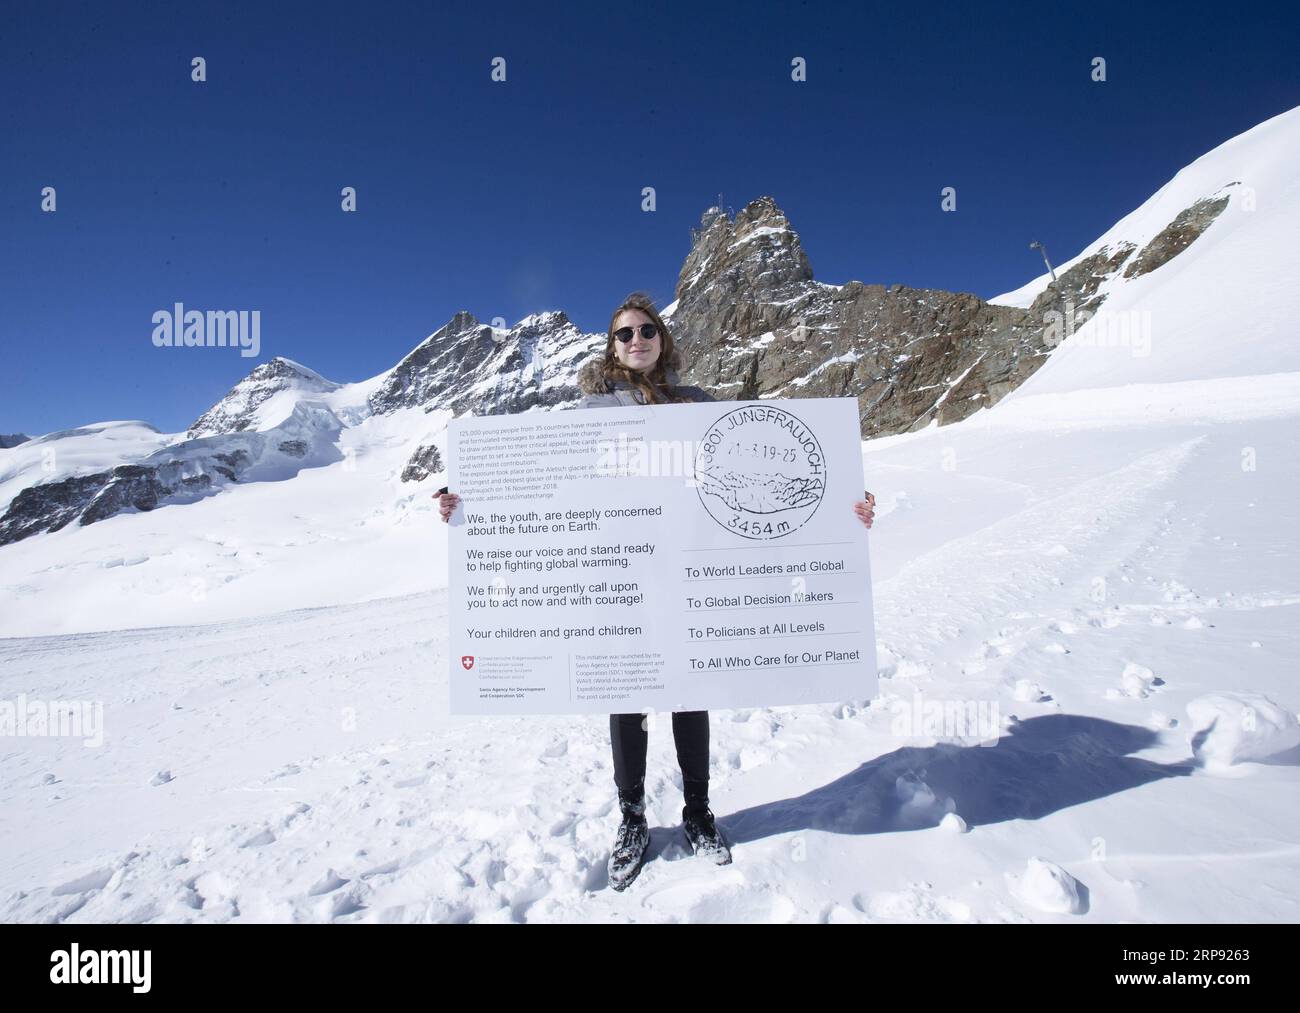 (190321) -- JUNGFRAUJOCH, March 21, 2019 (Xinhua) -- Swiss teenager Selma Schellenberg shows a copy of a postcard calling for action against climate change on the Aletsch glacier under Jungfraujoch in Switzerland, on March 20, 2019. Some 900 postcards from youths all over the world were stamped and sent on Wednesday from Europe s highest postbox on the Jungfraujoch peak, Switzerland, to global leaders, calling for action against climate change. (Xinhua/Xu Jinquan) SWITZERLAND-JUNGFRAUJOCH-CLIMATE CHANGE-POSTCARDS PUBLICATIONxNOTxINxCHN Stock Photo